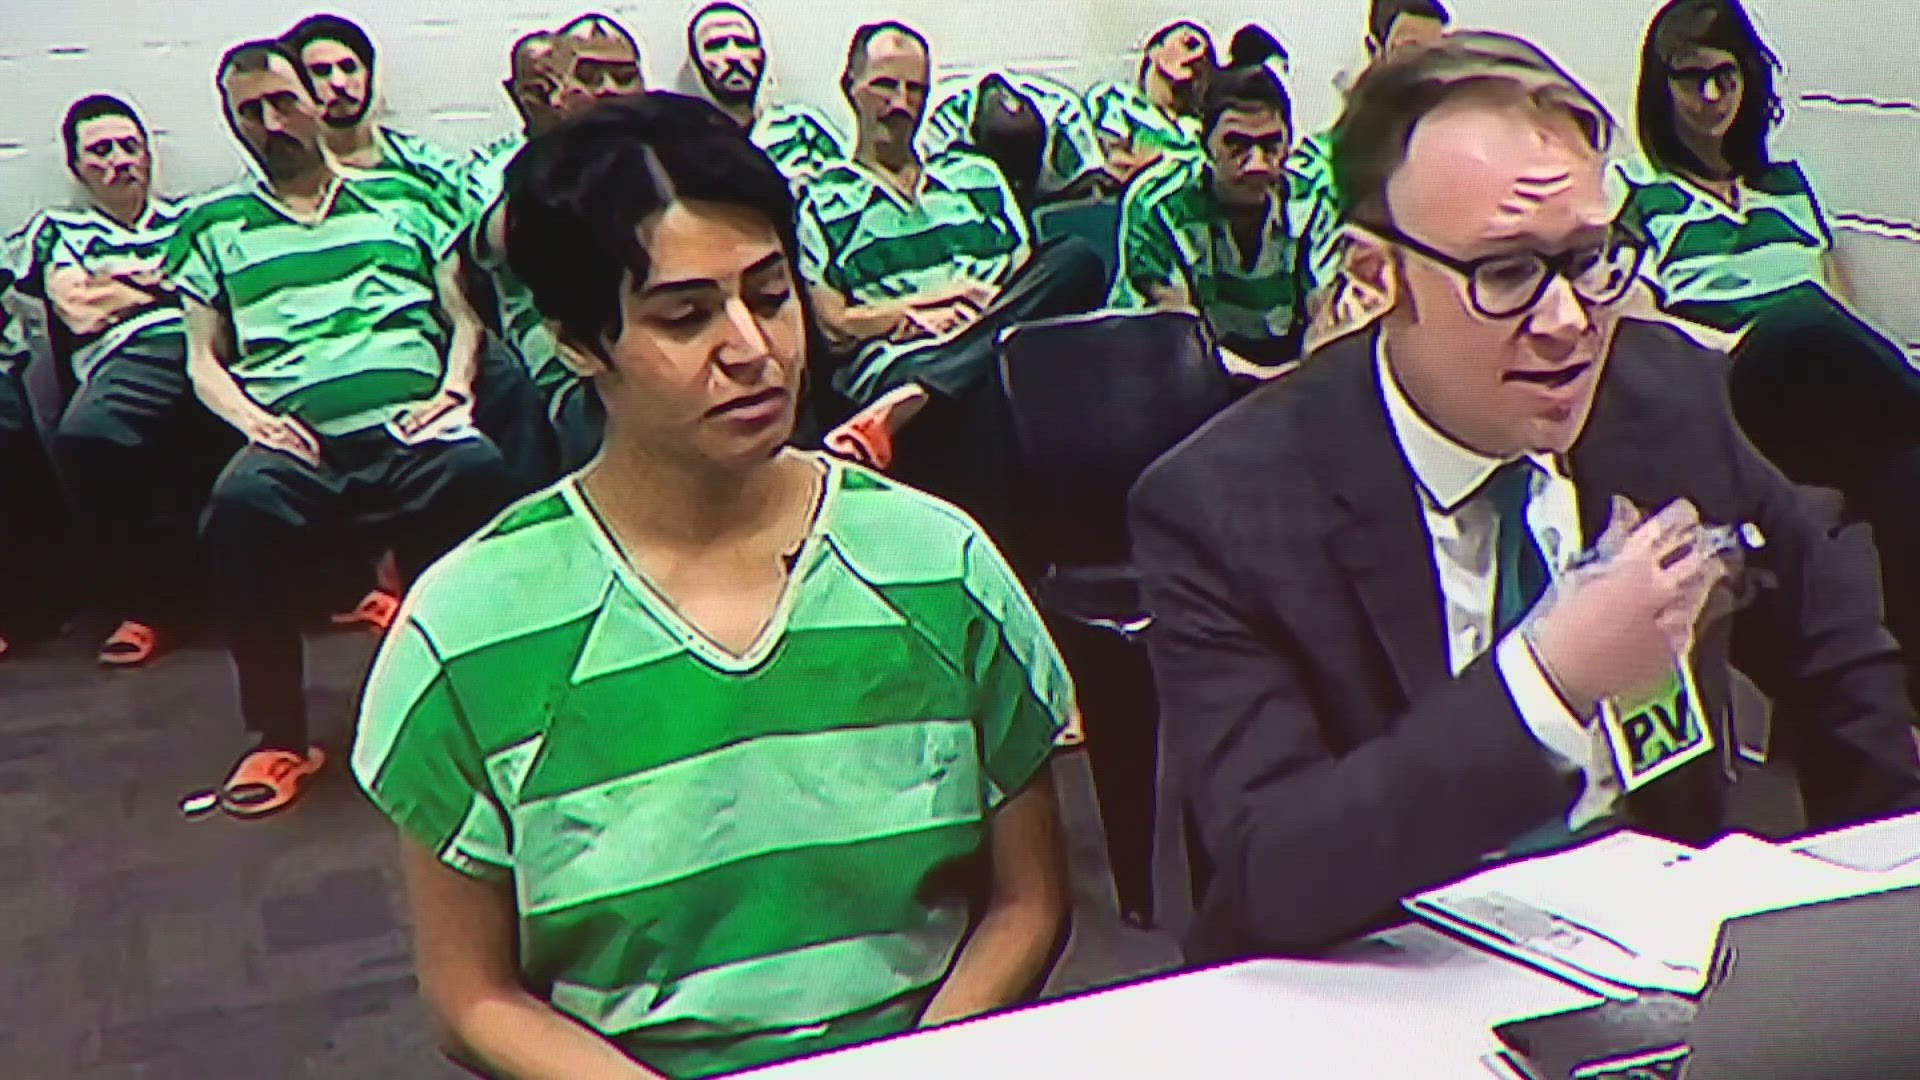 The suspect, identified as 27-year-old Janet Garcia, appeared in court for the first time on Monday where bail was set at $5 million.